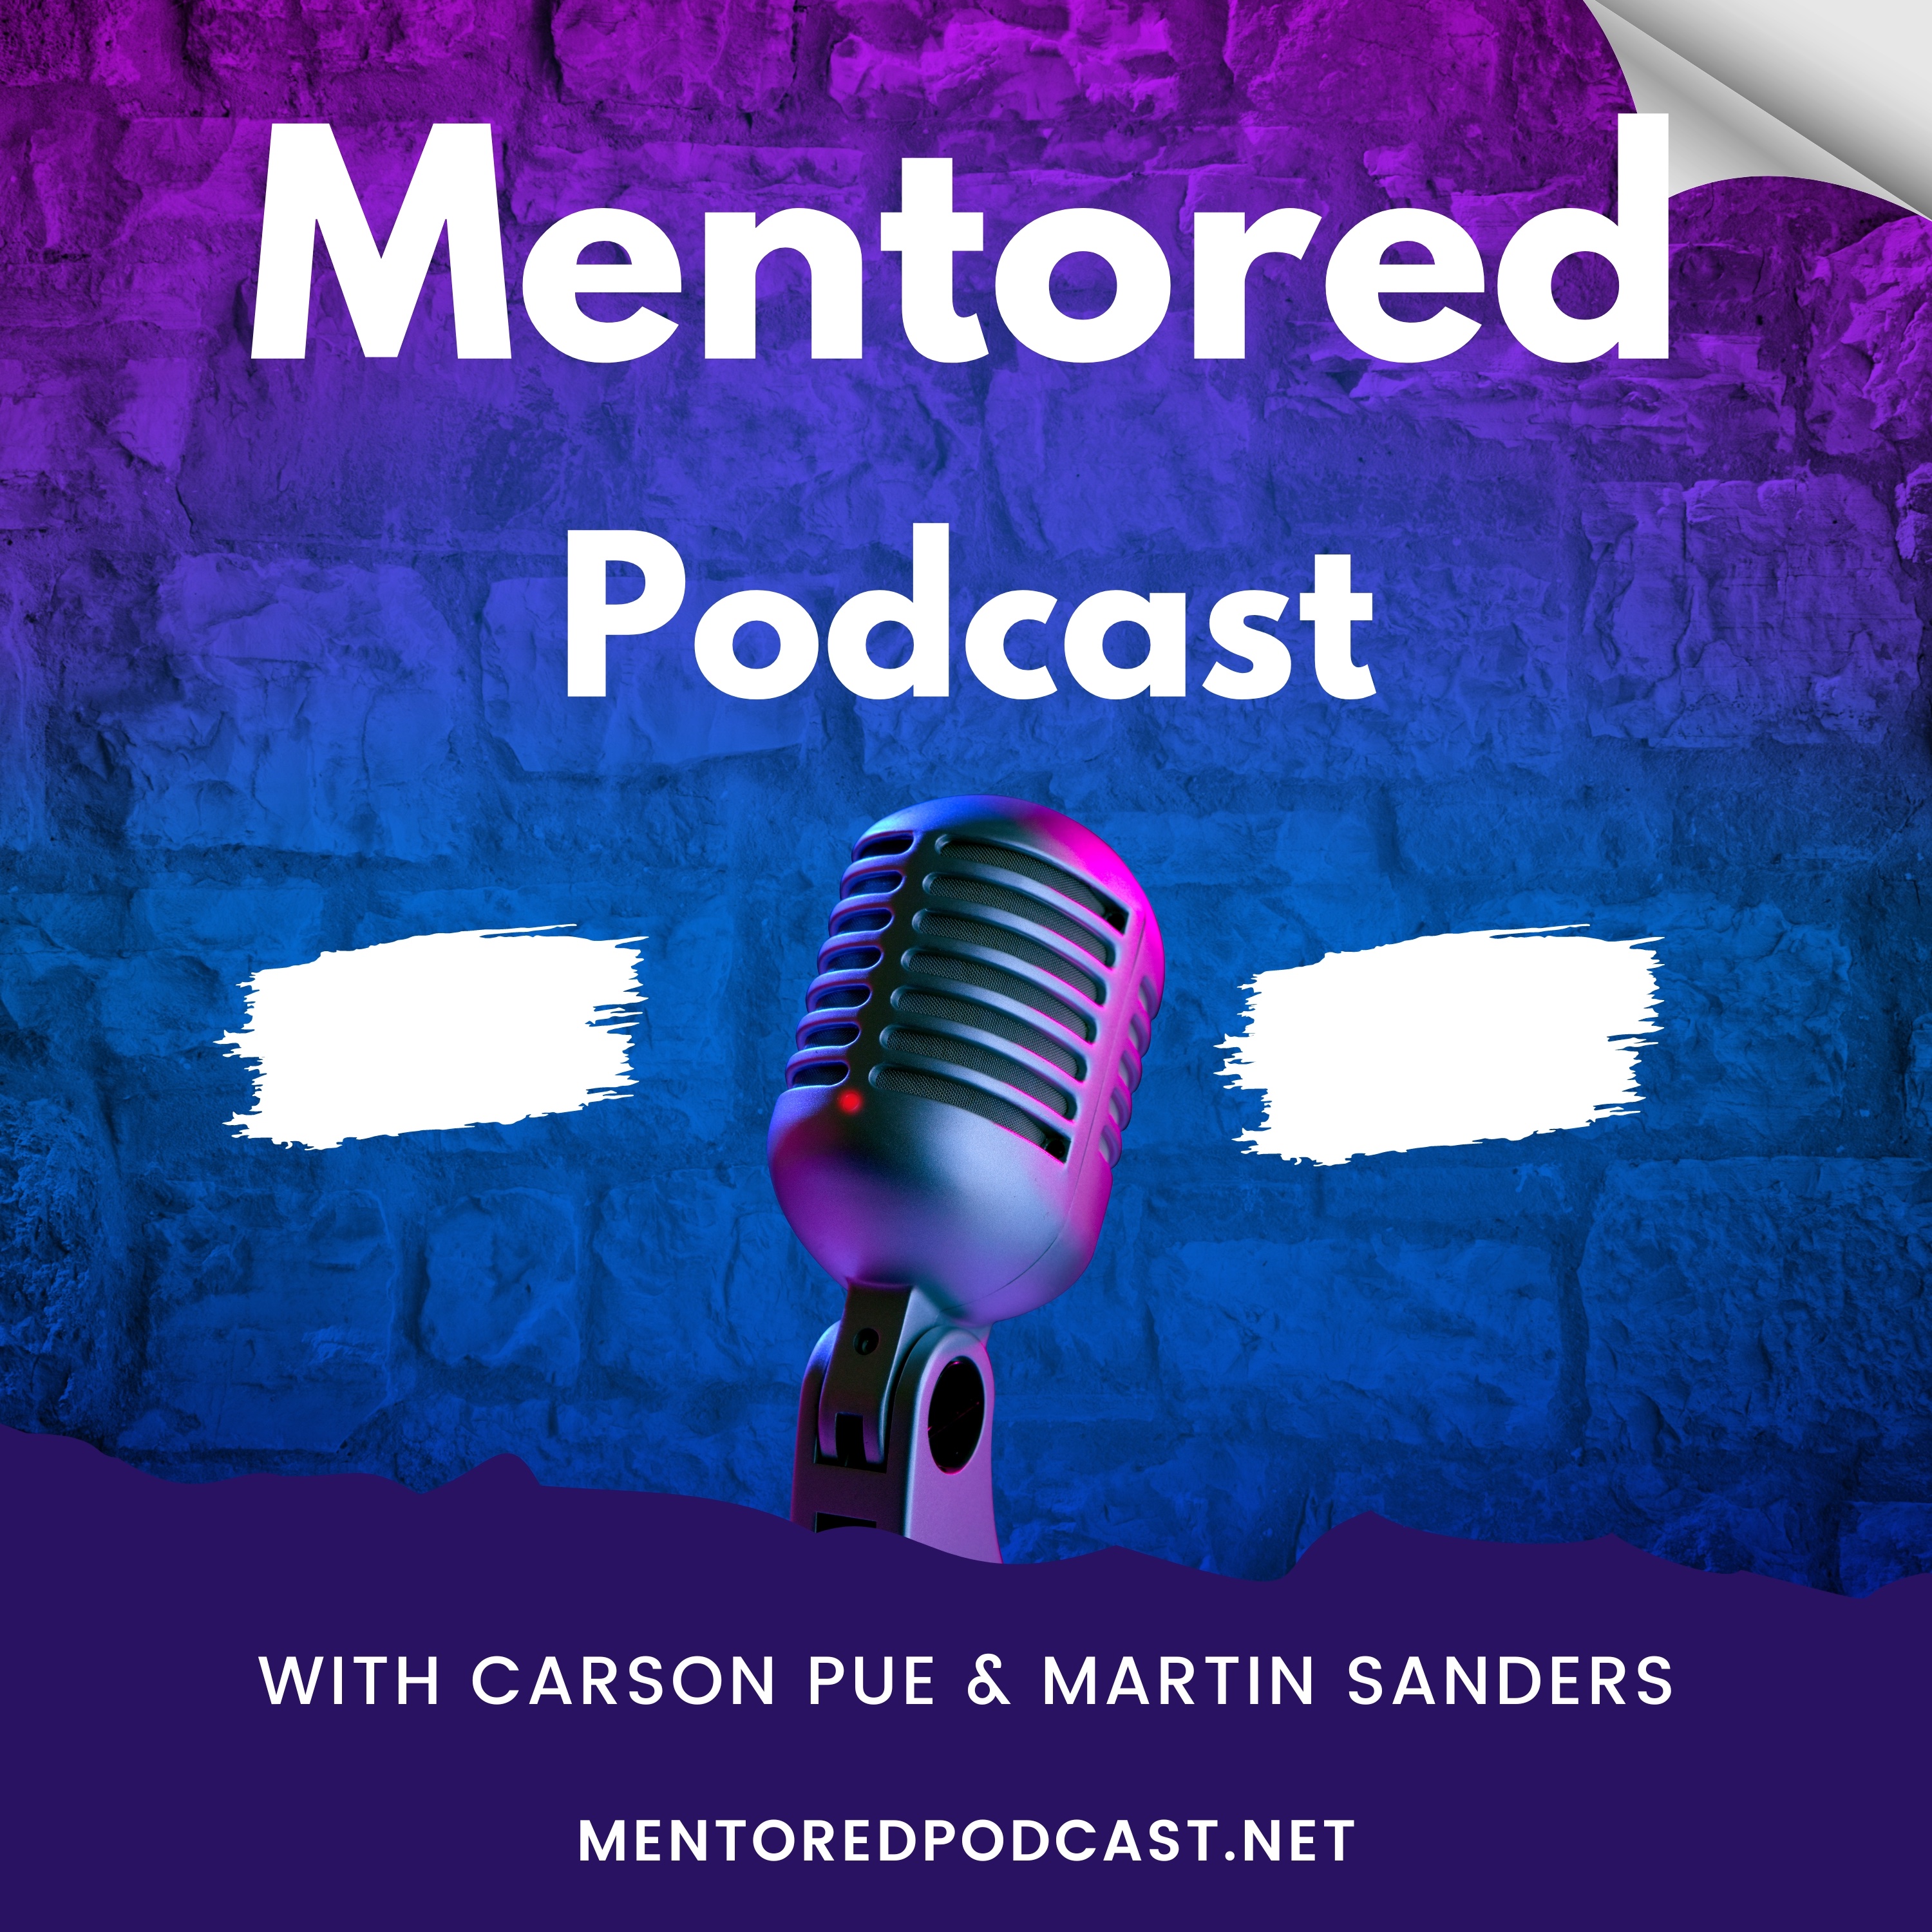 The Mentored Podcast with Carson Pue and Martin Sanders